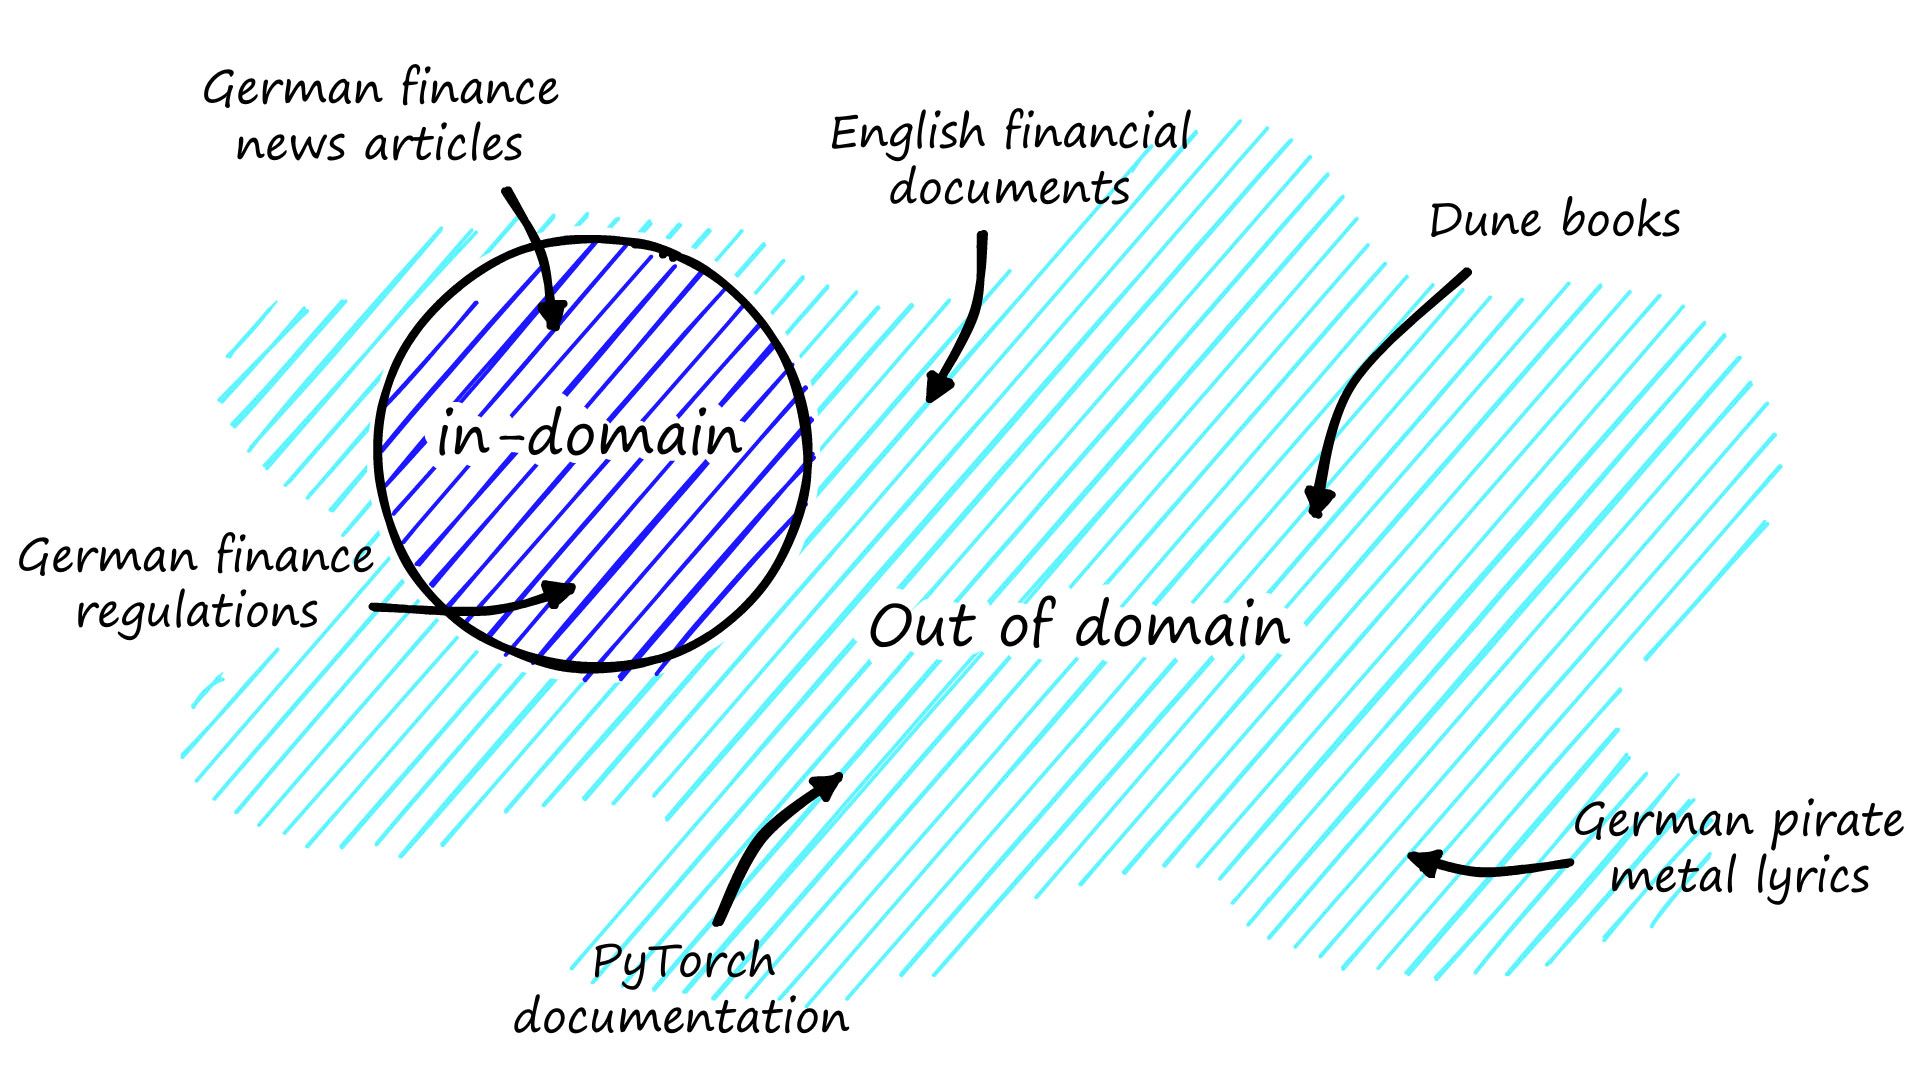 For a target domain of German financial documents, any data that fits the topic and we would expect our model to encounter is in-domain. Anything else is out-of-domain.